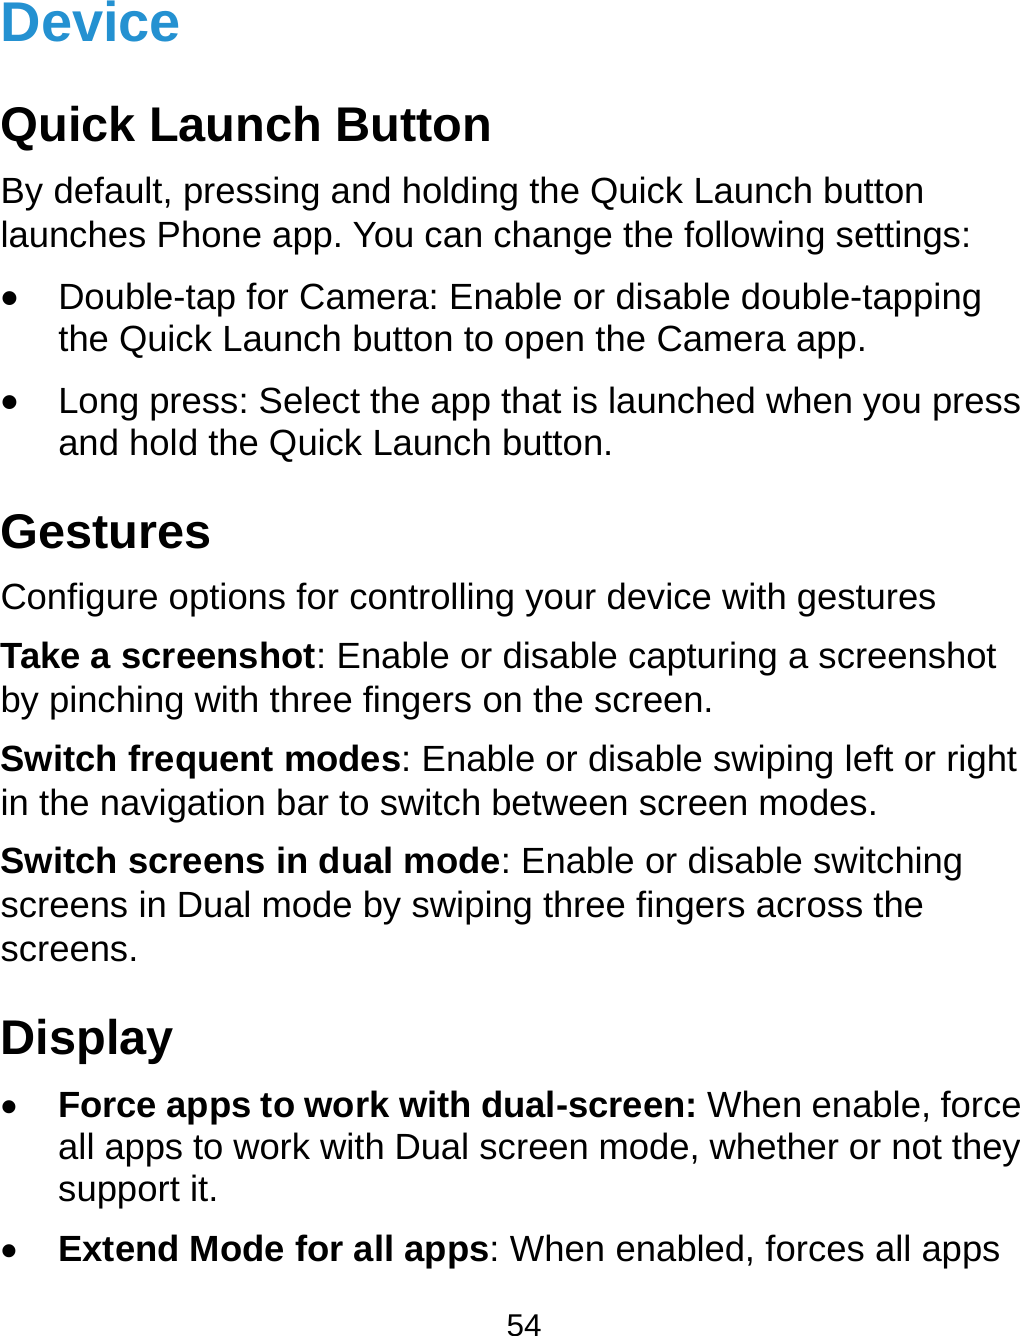  54 Device Quick Launch Button By default, pressing and holding the Quick Launch button launches Phone app. You can change the following settings:  Double-tap for Camera: Enable or disable double-tapping the Quick Launch button to open the Camera app.  Long press: Select the app that is launched when you press and hold the Quick Launch button. Gestures Configure options for controlling your device with gestures Take a screenshot: Enable or disable capturing a screenshot by pinching with three fingers on the screen. Switch frequent modes: Enable or disable swiping left or right in the navigation bar to switch between screen modes. Switch screens in dual mode: Enable or disable switching screens in Dual mode by swiping three fingers across the screens. Display  Force apps to work with dual-screen: When enable, force all apps to work with Dual screen mode, whether or not they support it.  Extend Mode for all apps: When enabled, forces all apps 